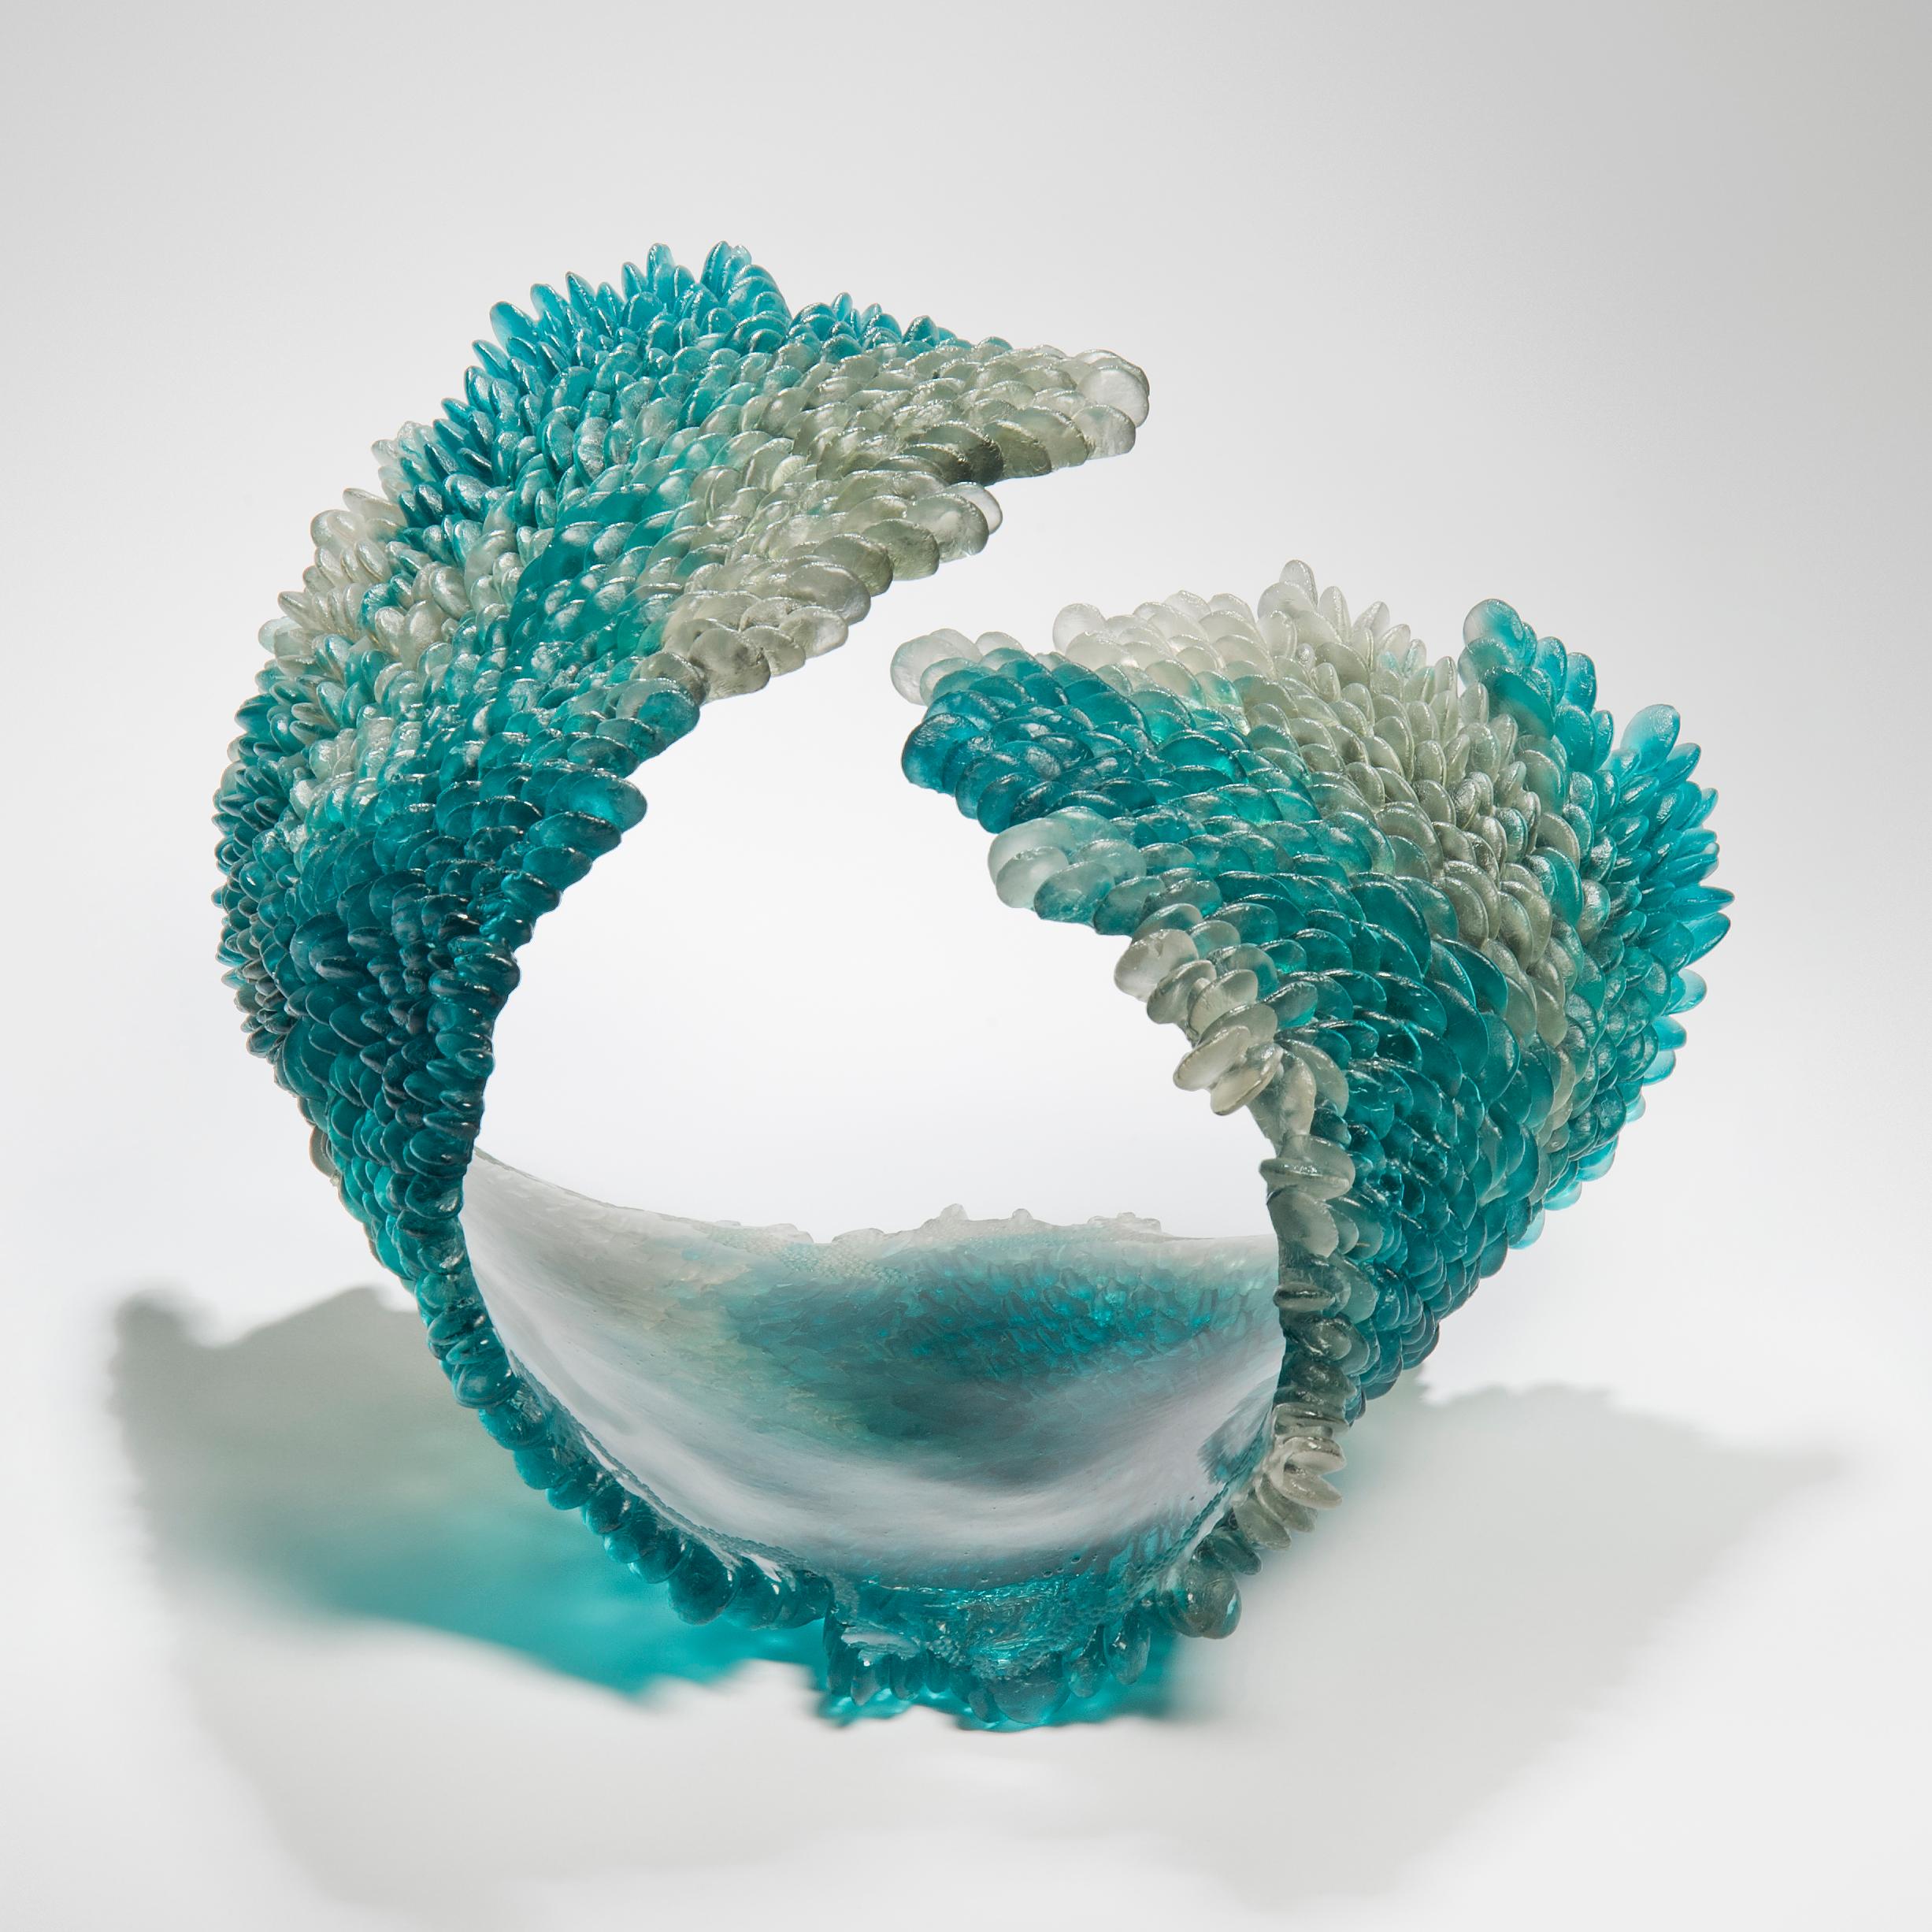 Organic Modern Alliform II, a Unique Glass Sculpture in Clear and Teal by Nina Casson McGarva